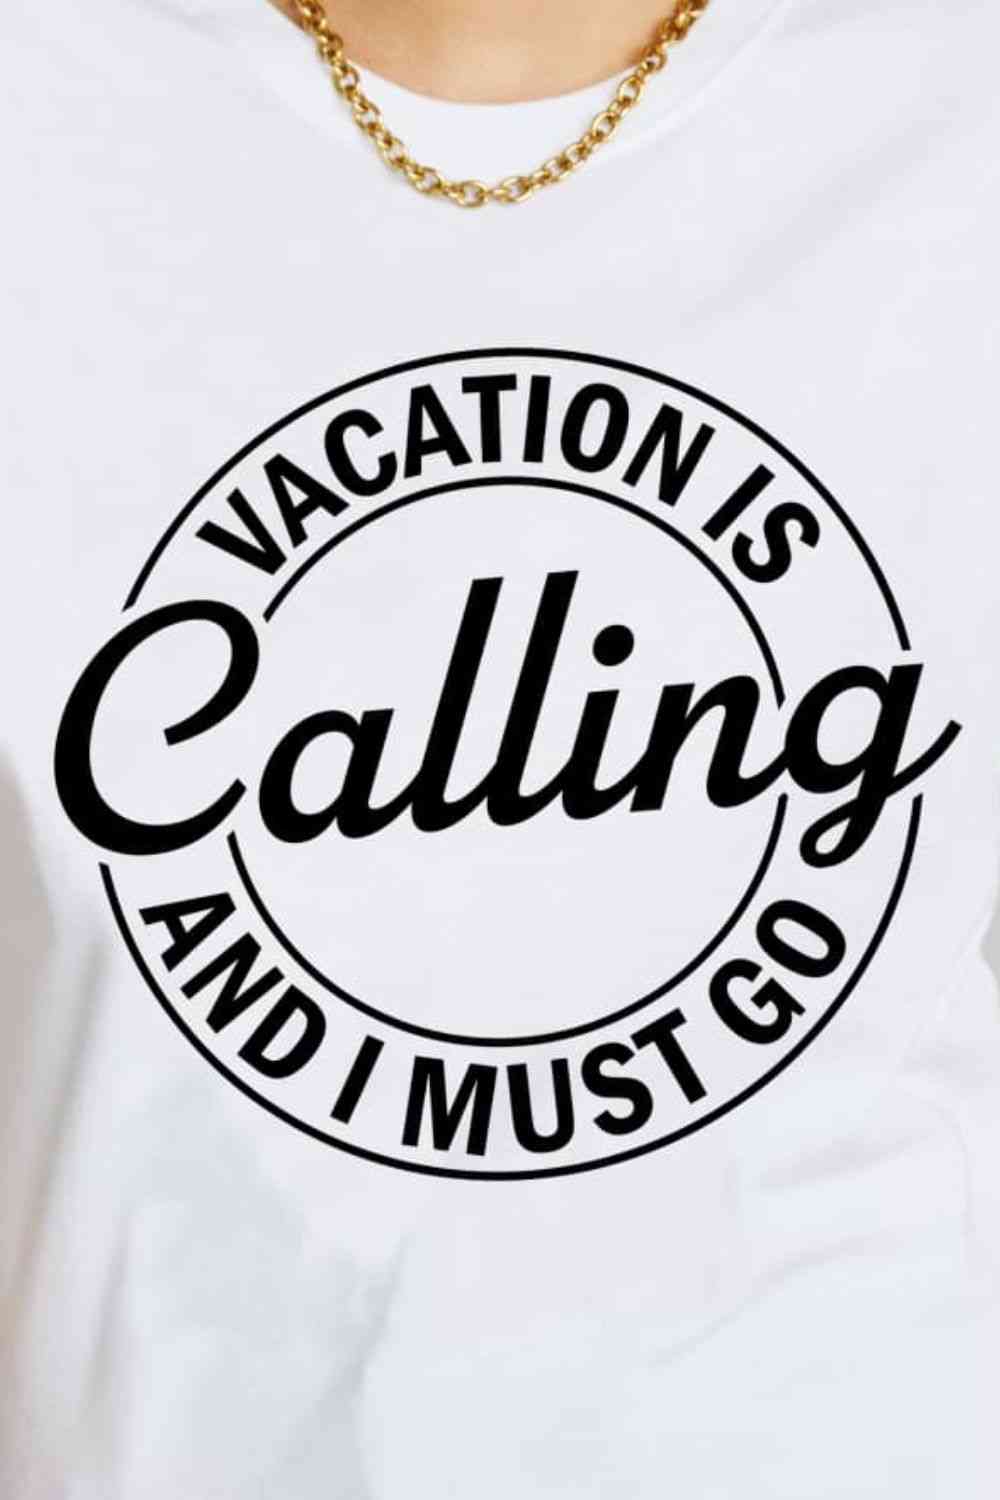 Simply Love VACATION IS CALLING AND I MUST GO Graphic Cotton T-Shirt - TRENDMELO